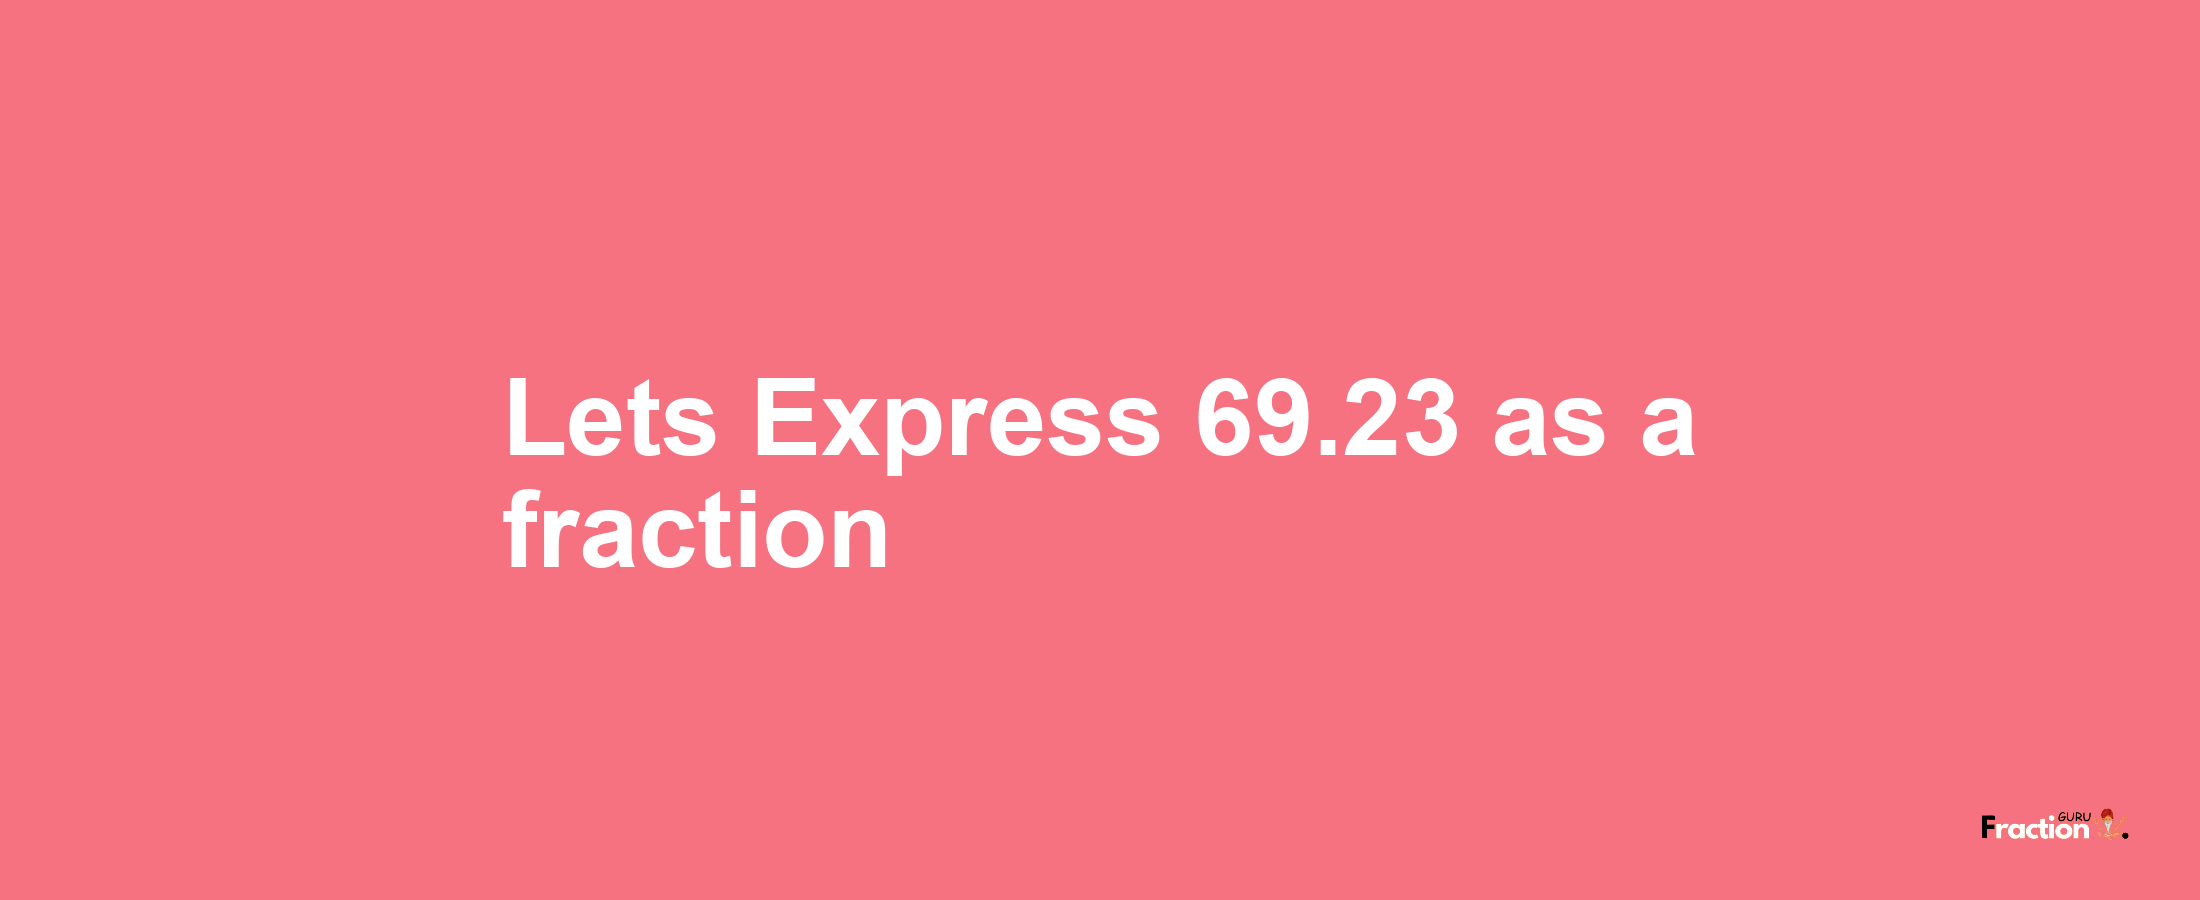 Lets Express 69.23 as afraction